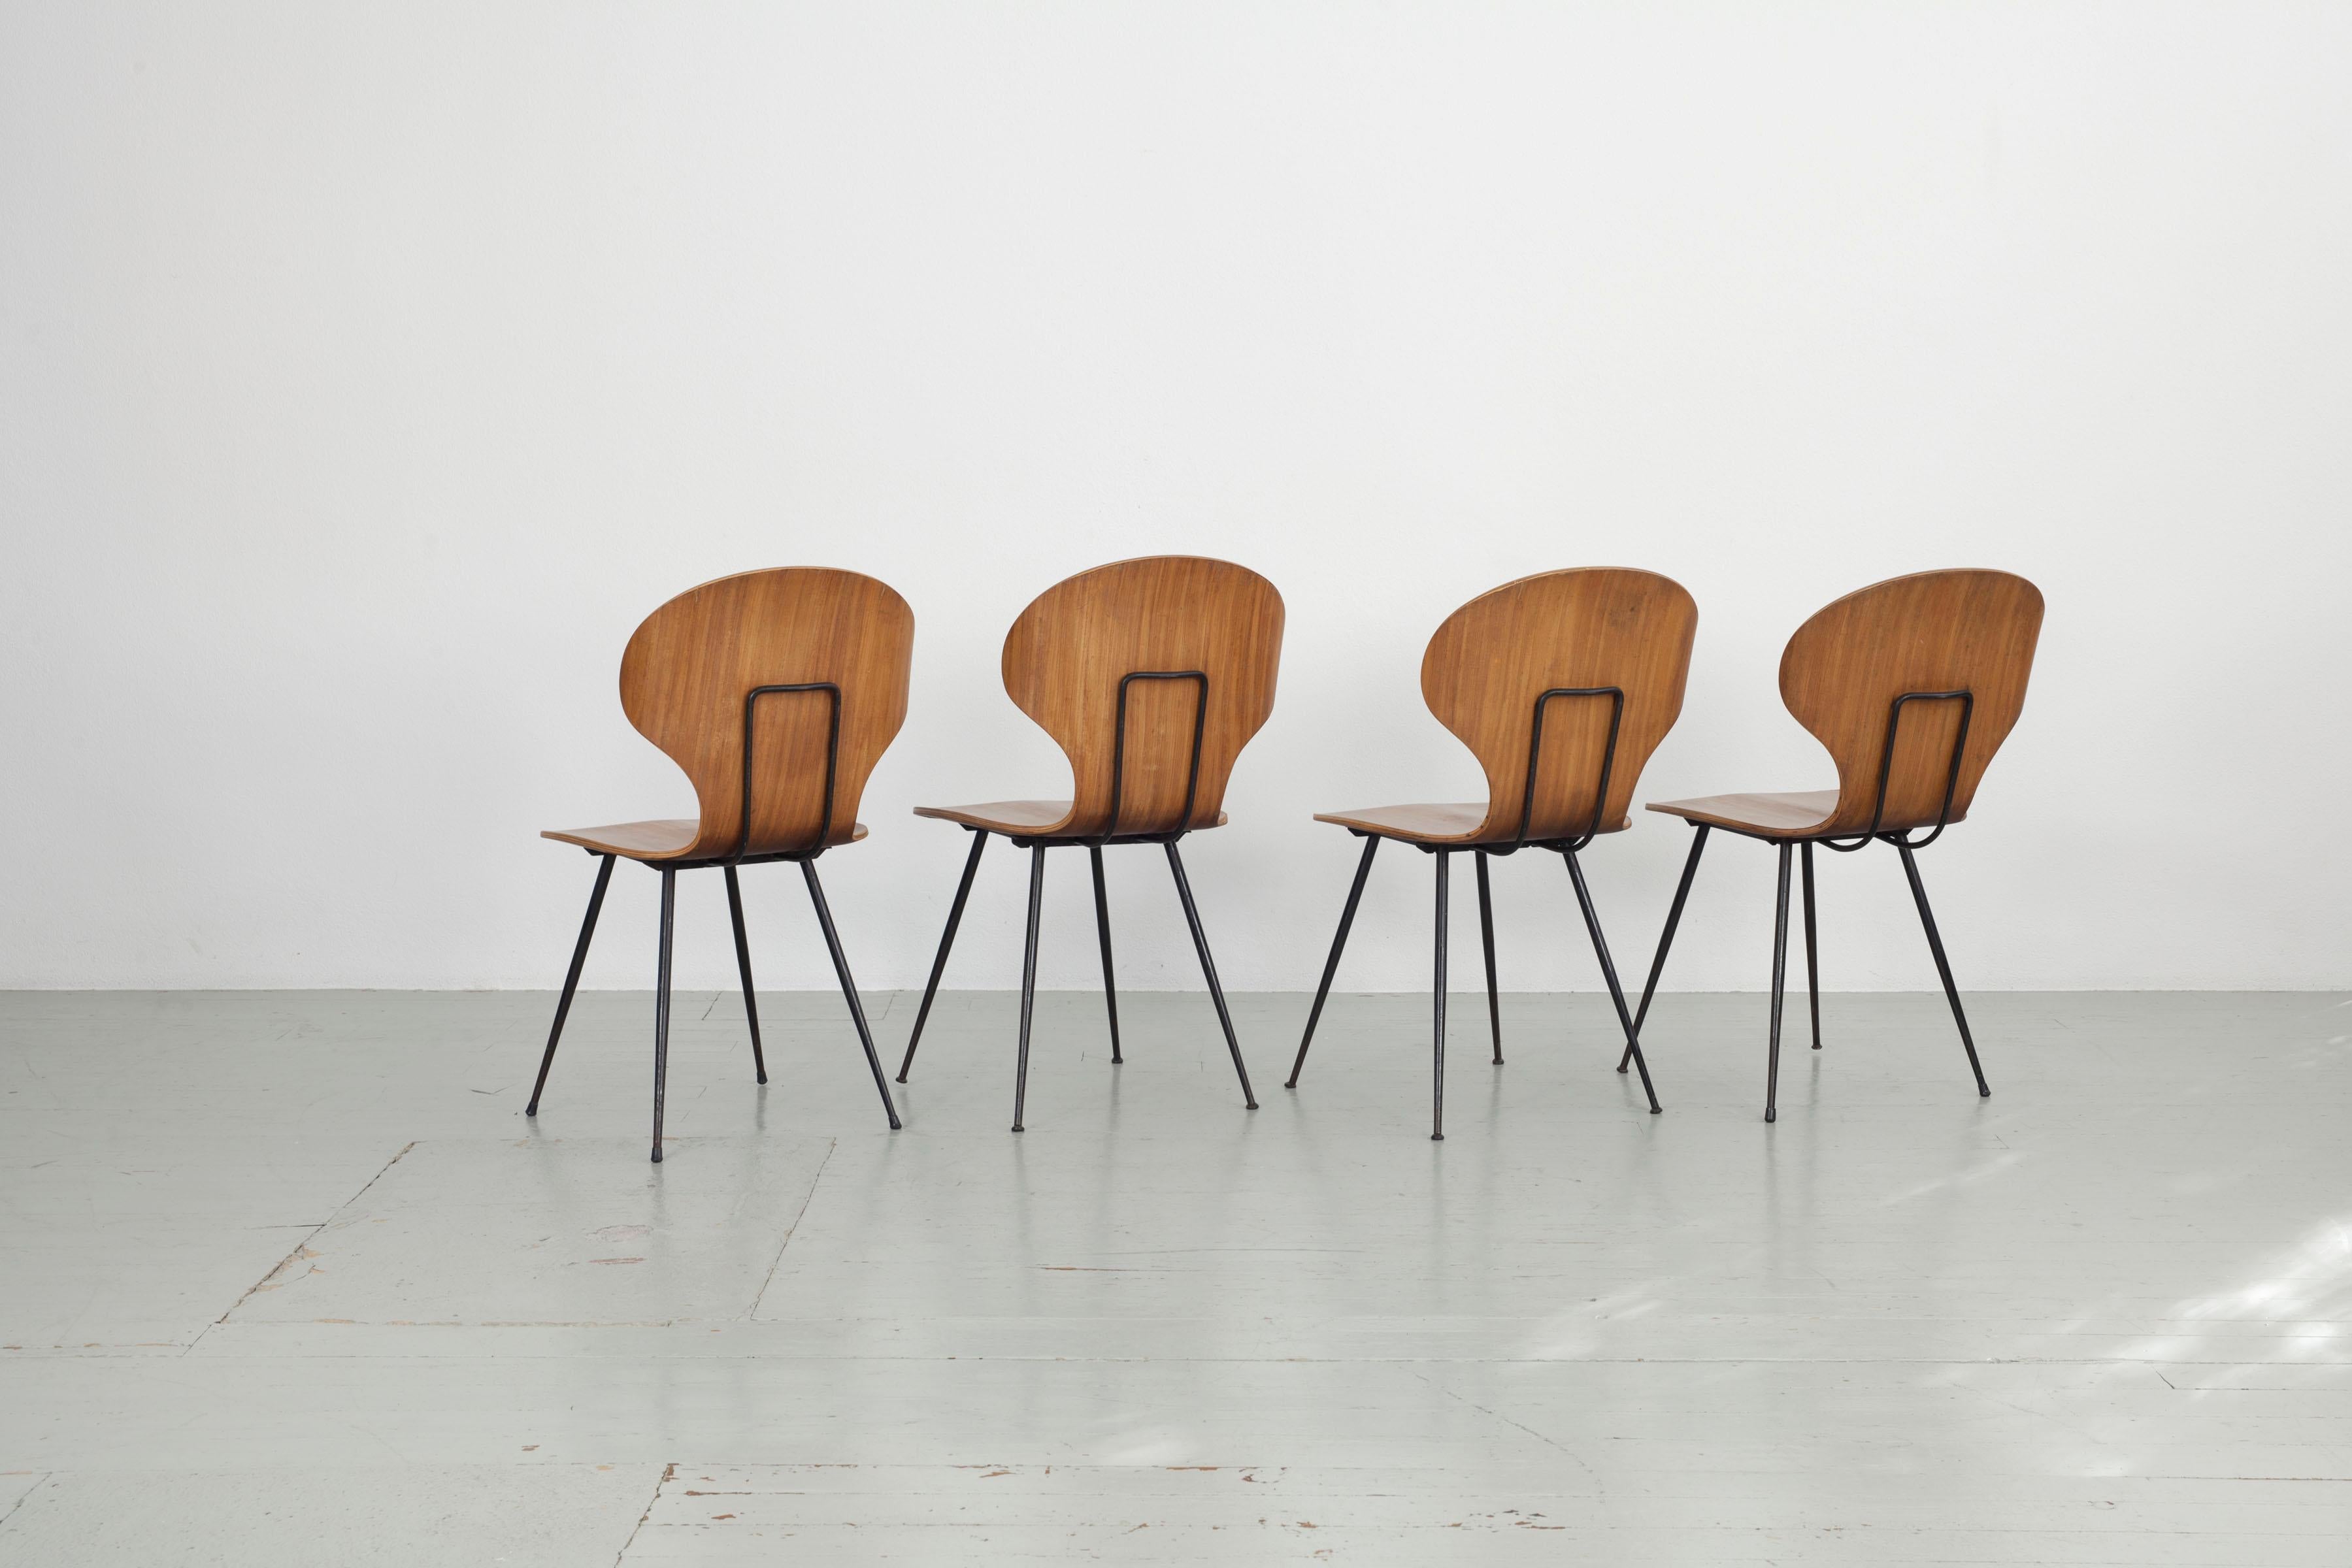 Mid-20th Century Set of 4 Bentwood chairs by Carlo Ratti, Industria Legni Curvati, Italy  1950s. For Sale